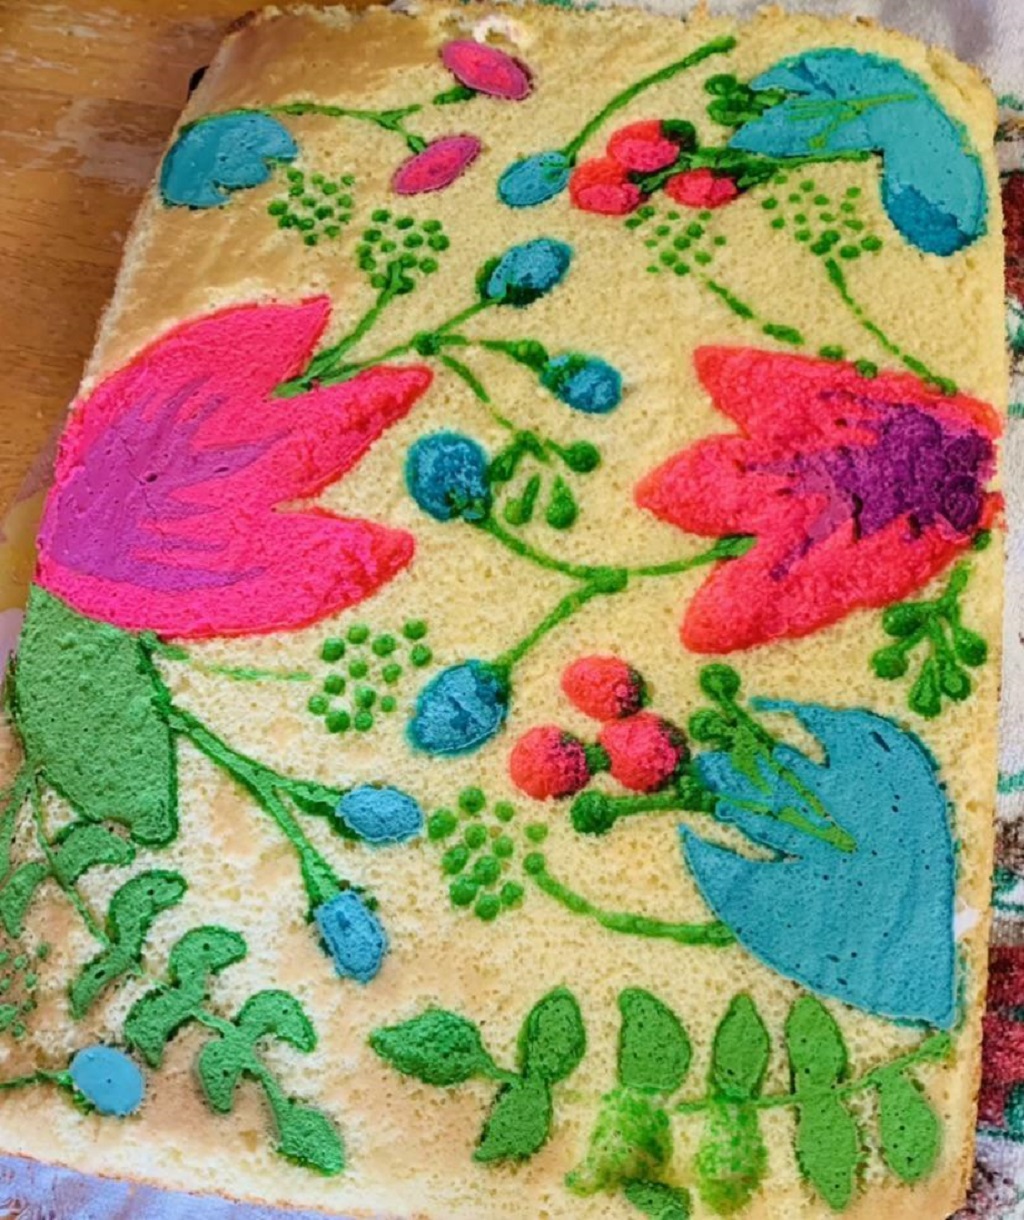 Attempted A Frosting Free "Decorated" Cake- For My Daughter. She Has Celiac And A Few Other Allergies That Prevent Her From Having The "Pretty Stuff." She Was Happy